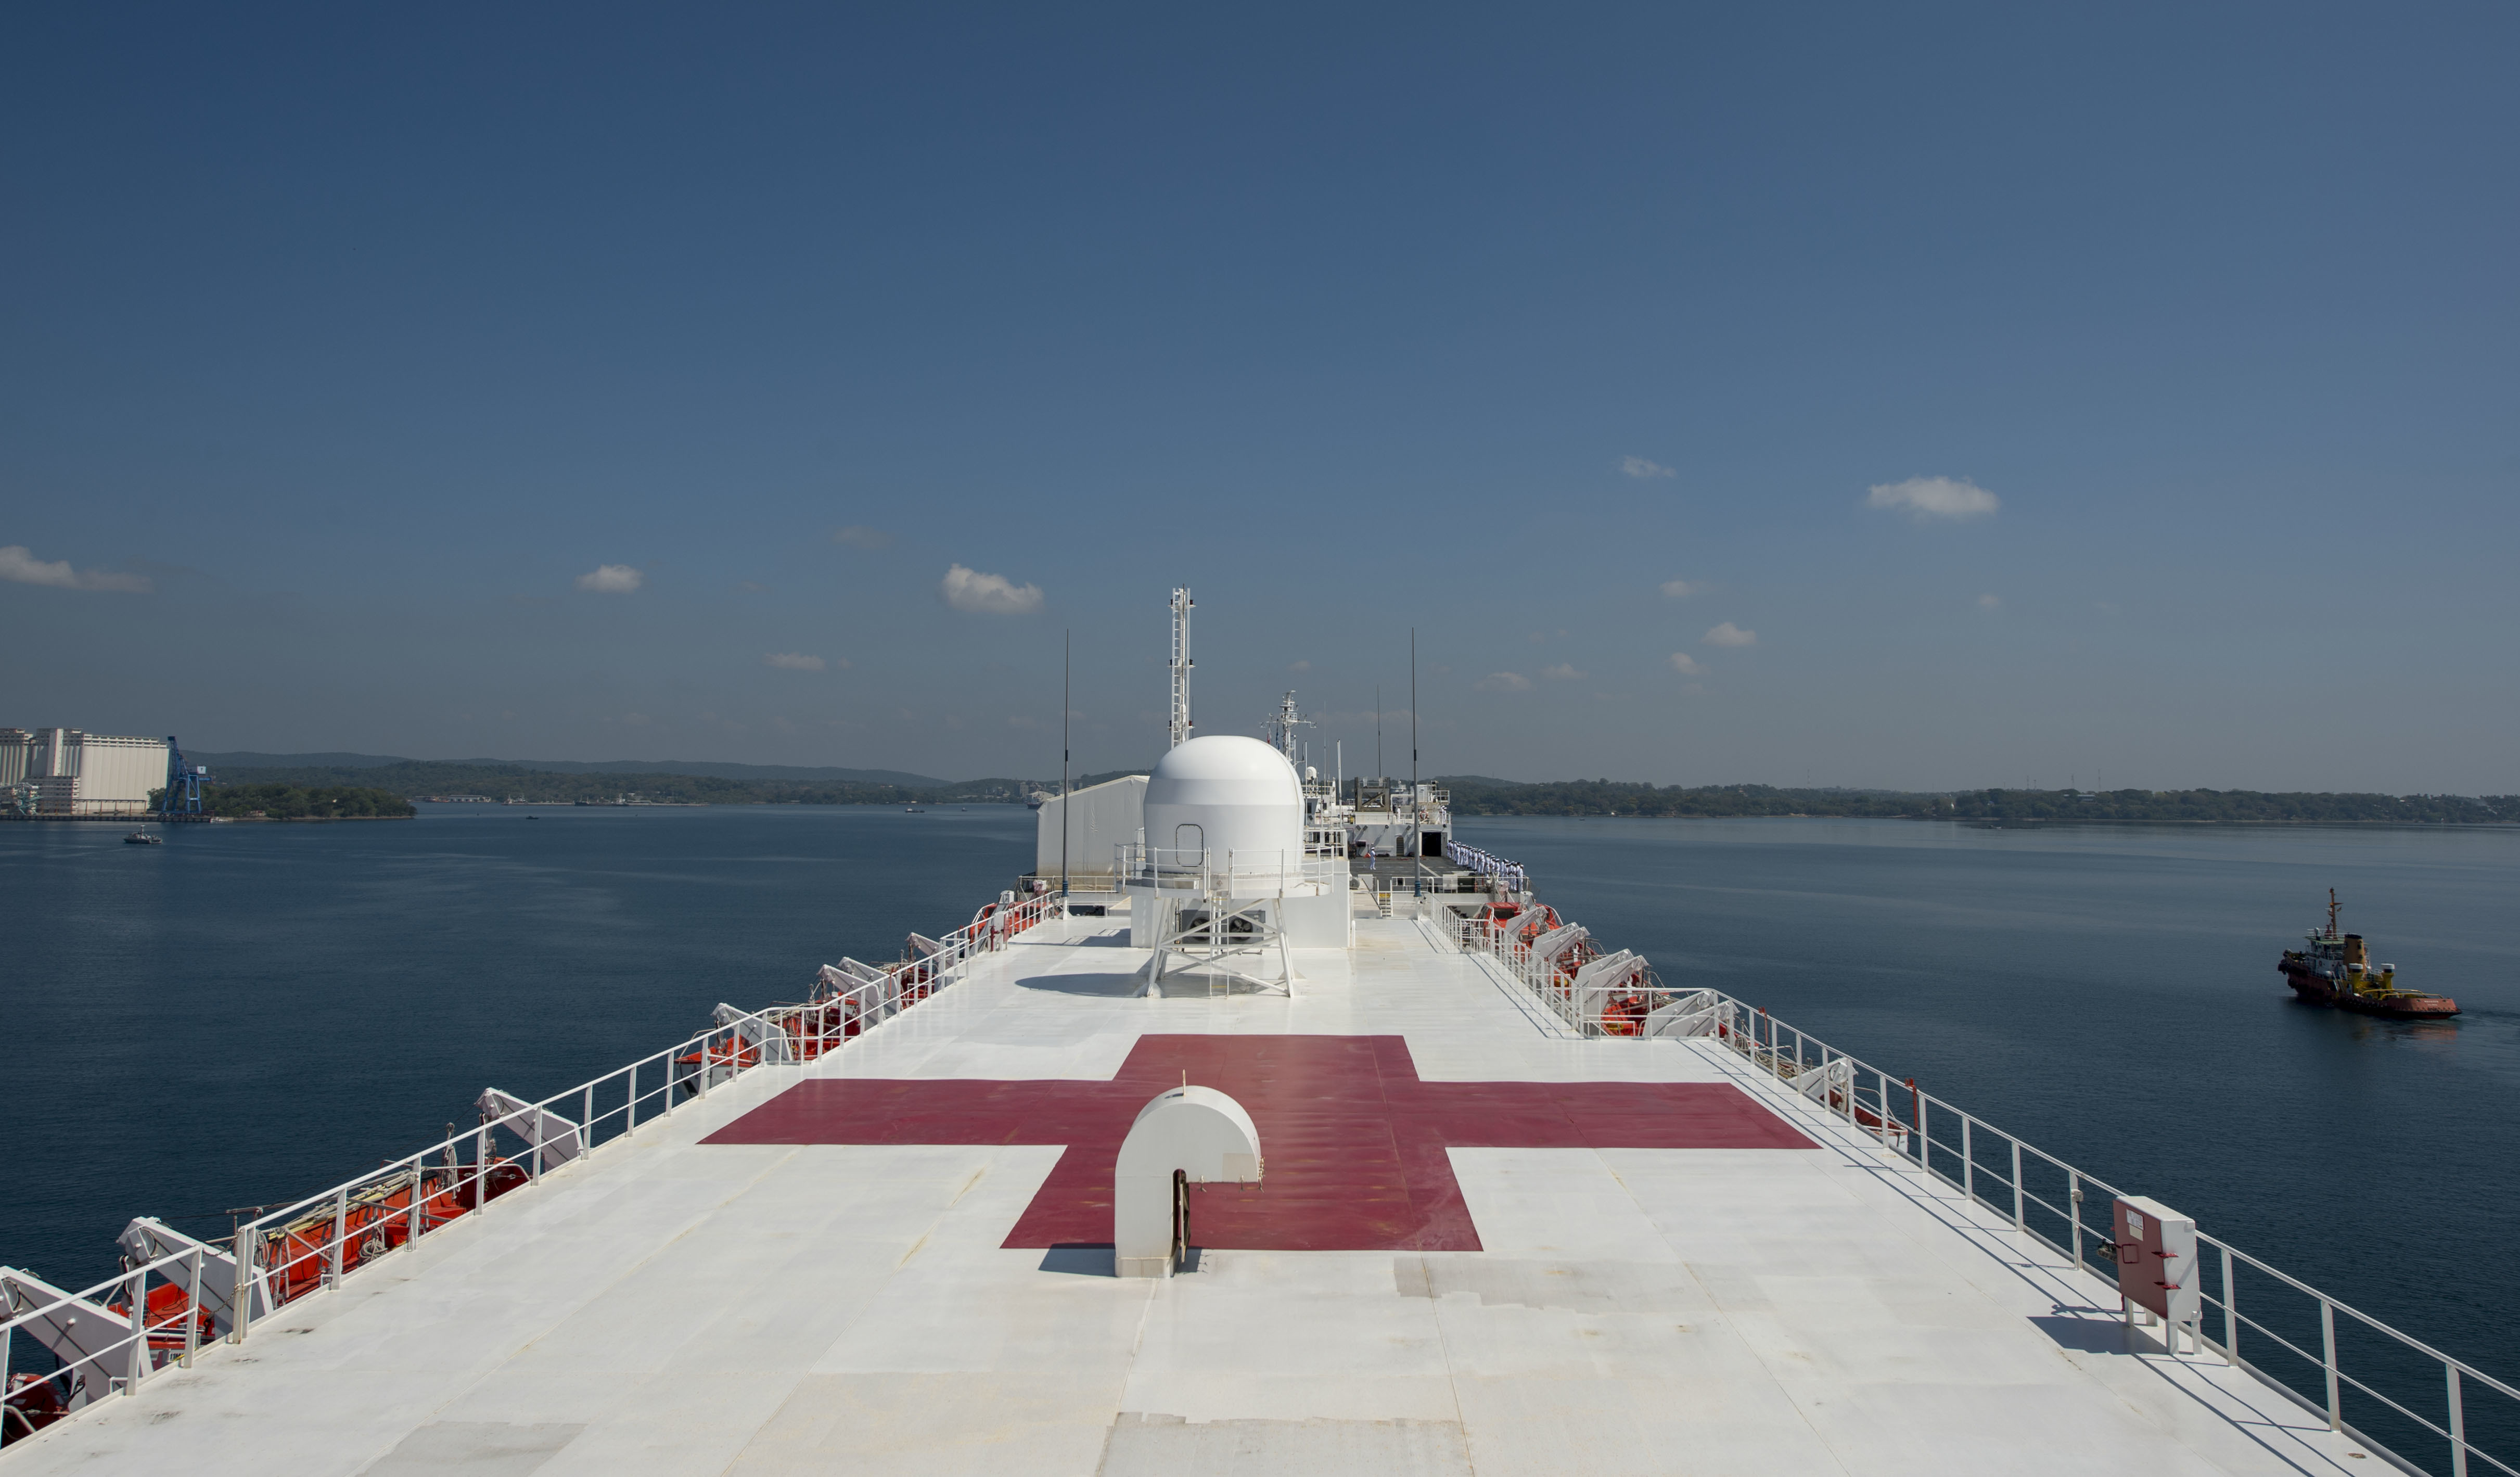 Military Sealift Command hospital ship USNS Mercy (T-AH 19) prepares to arrive in Trincomolee, Sri Lanka, for a scheduled port visit in support of Pacific Partnership 2018 (PP18). PP18’s mission is to work collectively with host and partner nations to enhance regional interoperability and disaster response capabilities, increase stability and security in the region, and foster new and enduring friendships across the Indo-Pacific Region. Pacific Partnership, now in its 13th iteration, is the largest annual multinational humanitarian assistance and disaster relief preparedness mission conducted in the Indo-Pacific.